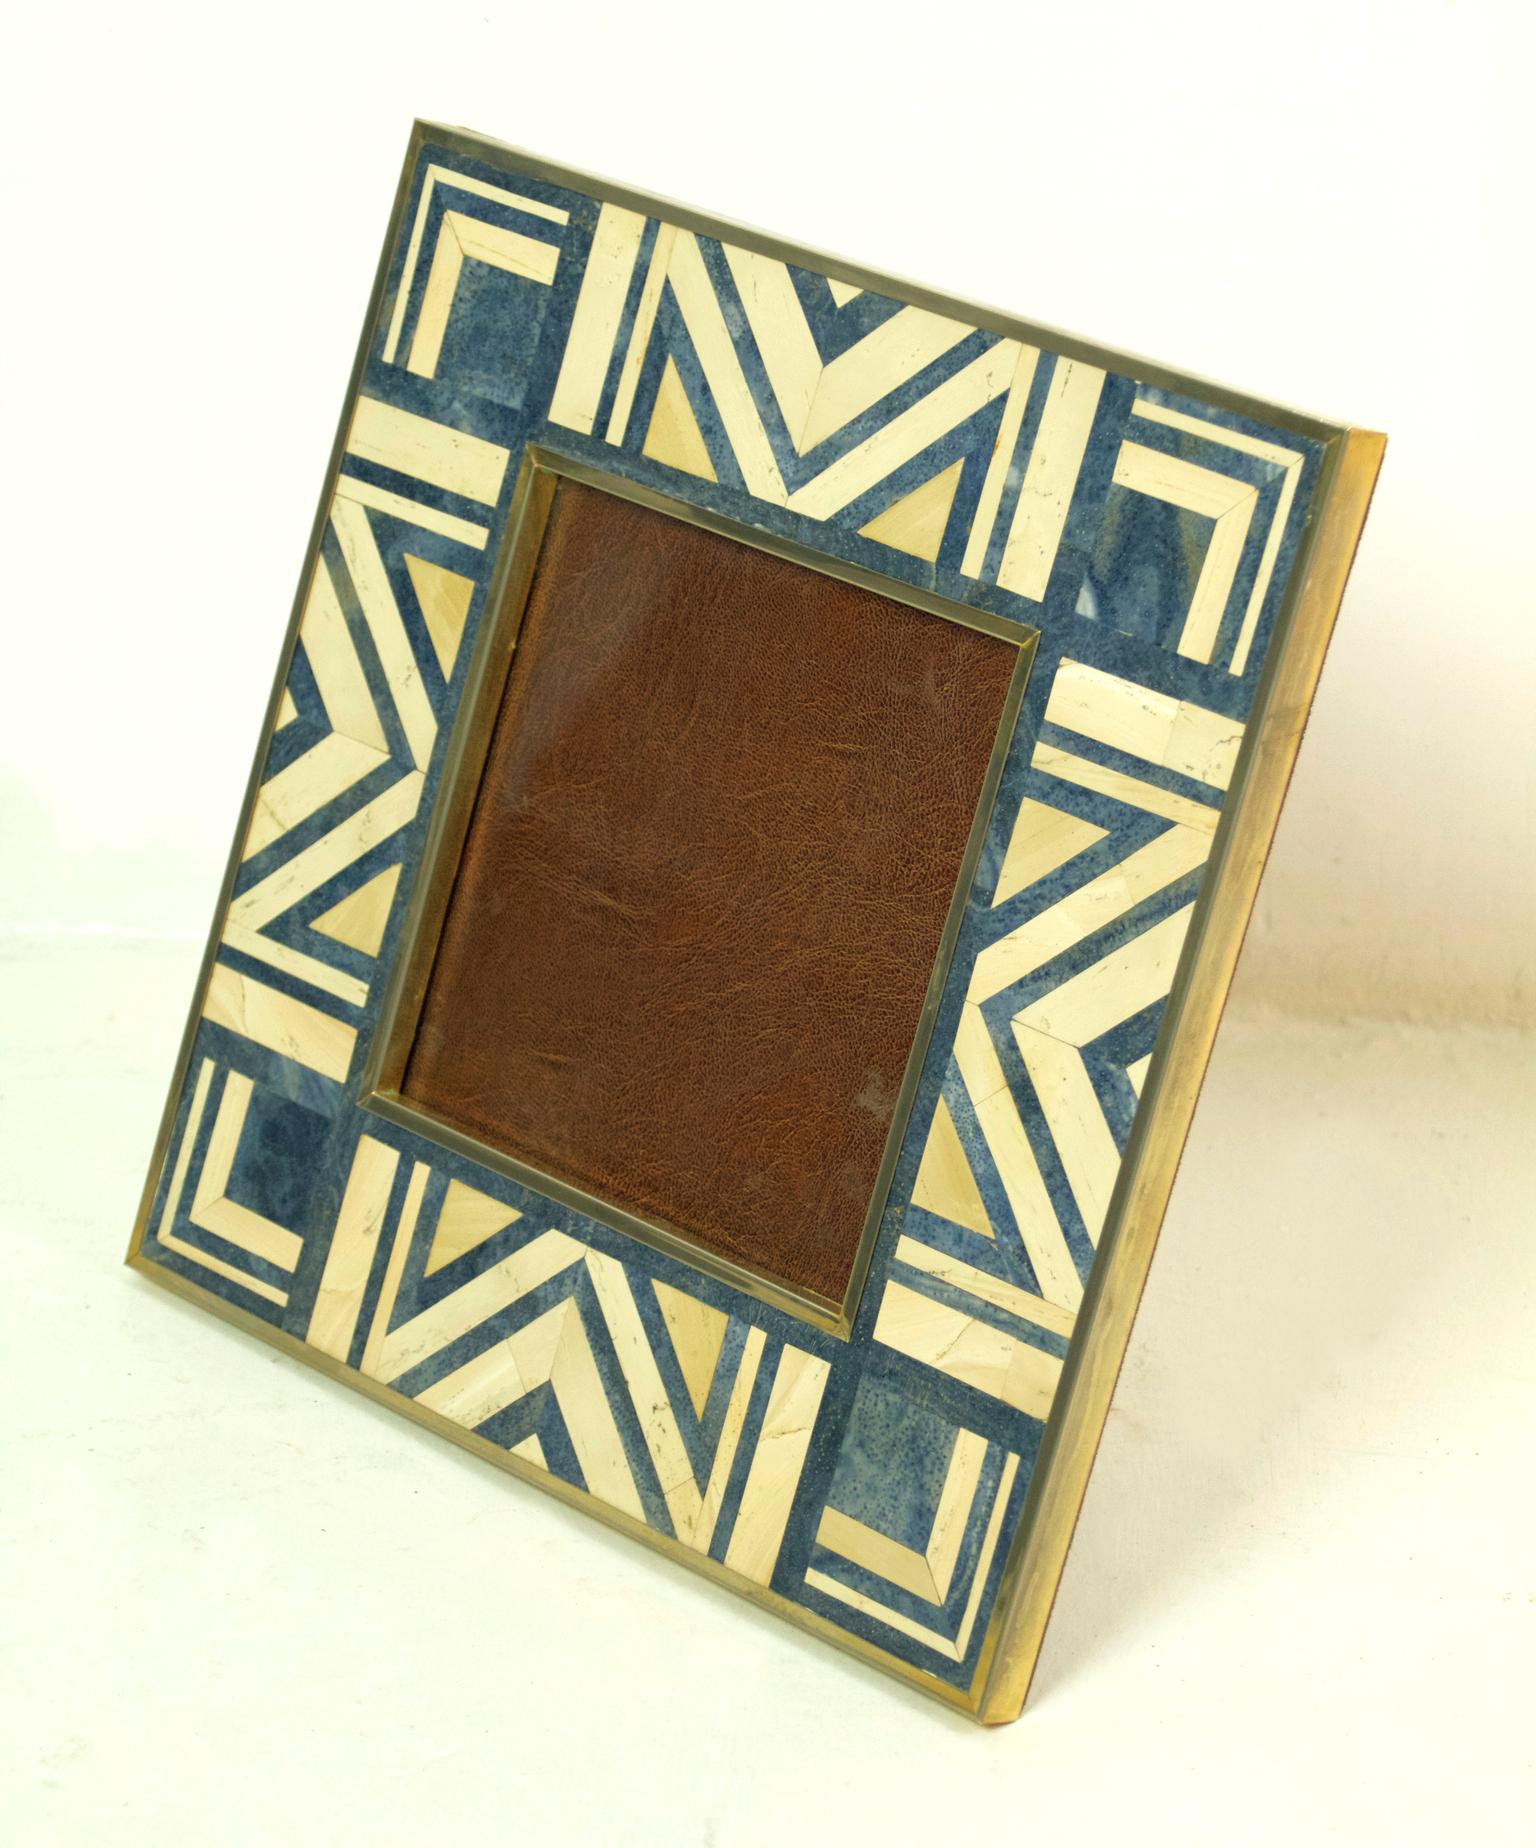 A large square Art Deco style photo/picture frame with a graphic pattern in blue and ivory colored marble with brass surrounds. Considering it is marble it´s carries some weight to it.